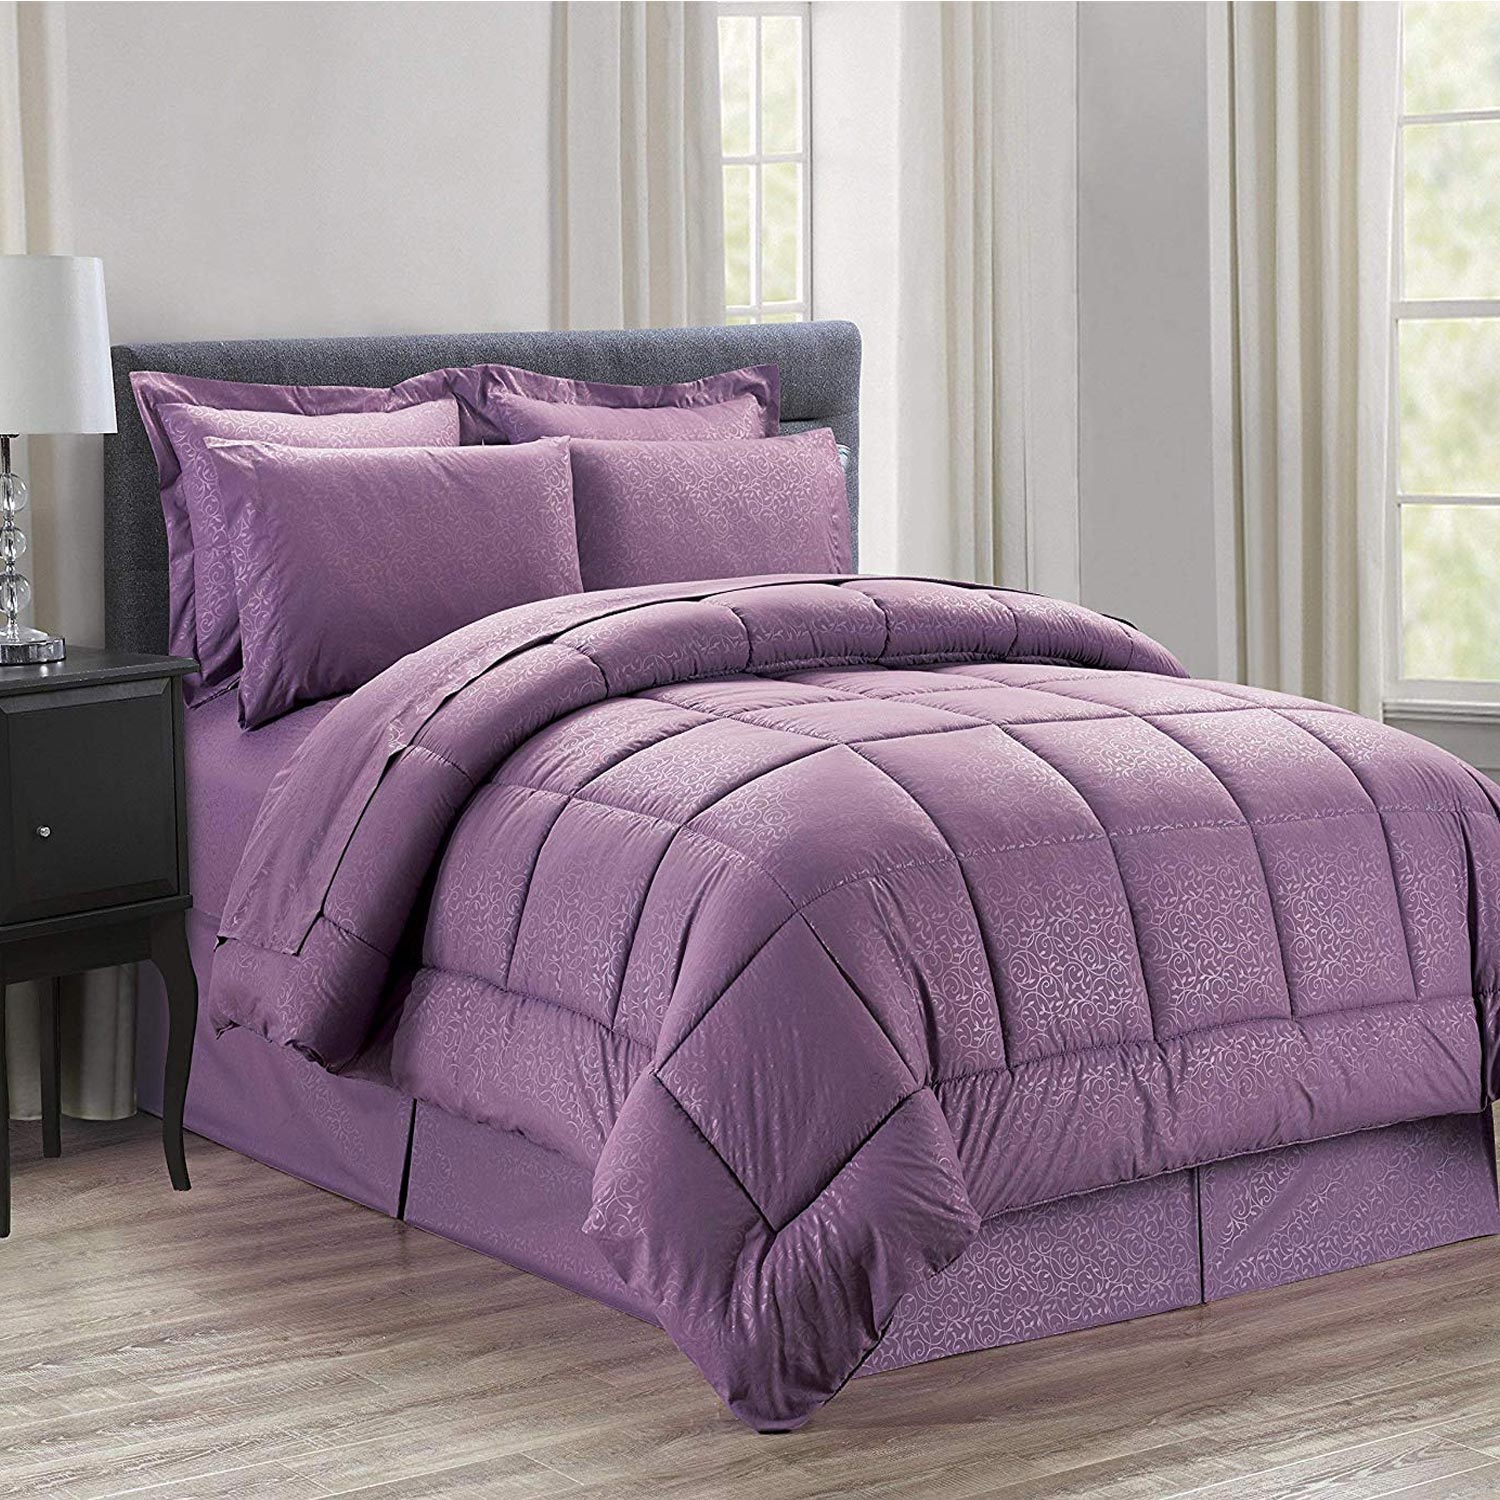 8-Piece Silky Soft Beautiful Design Complete Bed-in-a-Bag Comforter Set